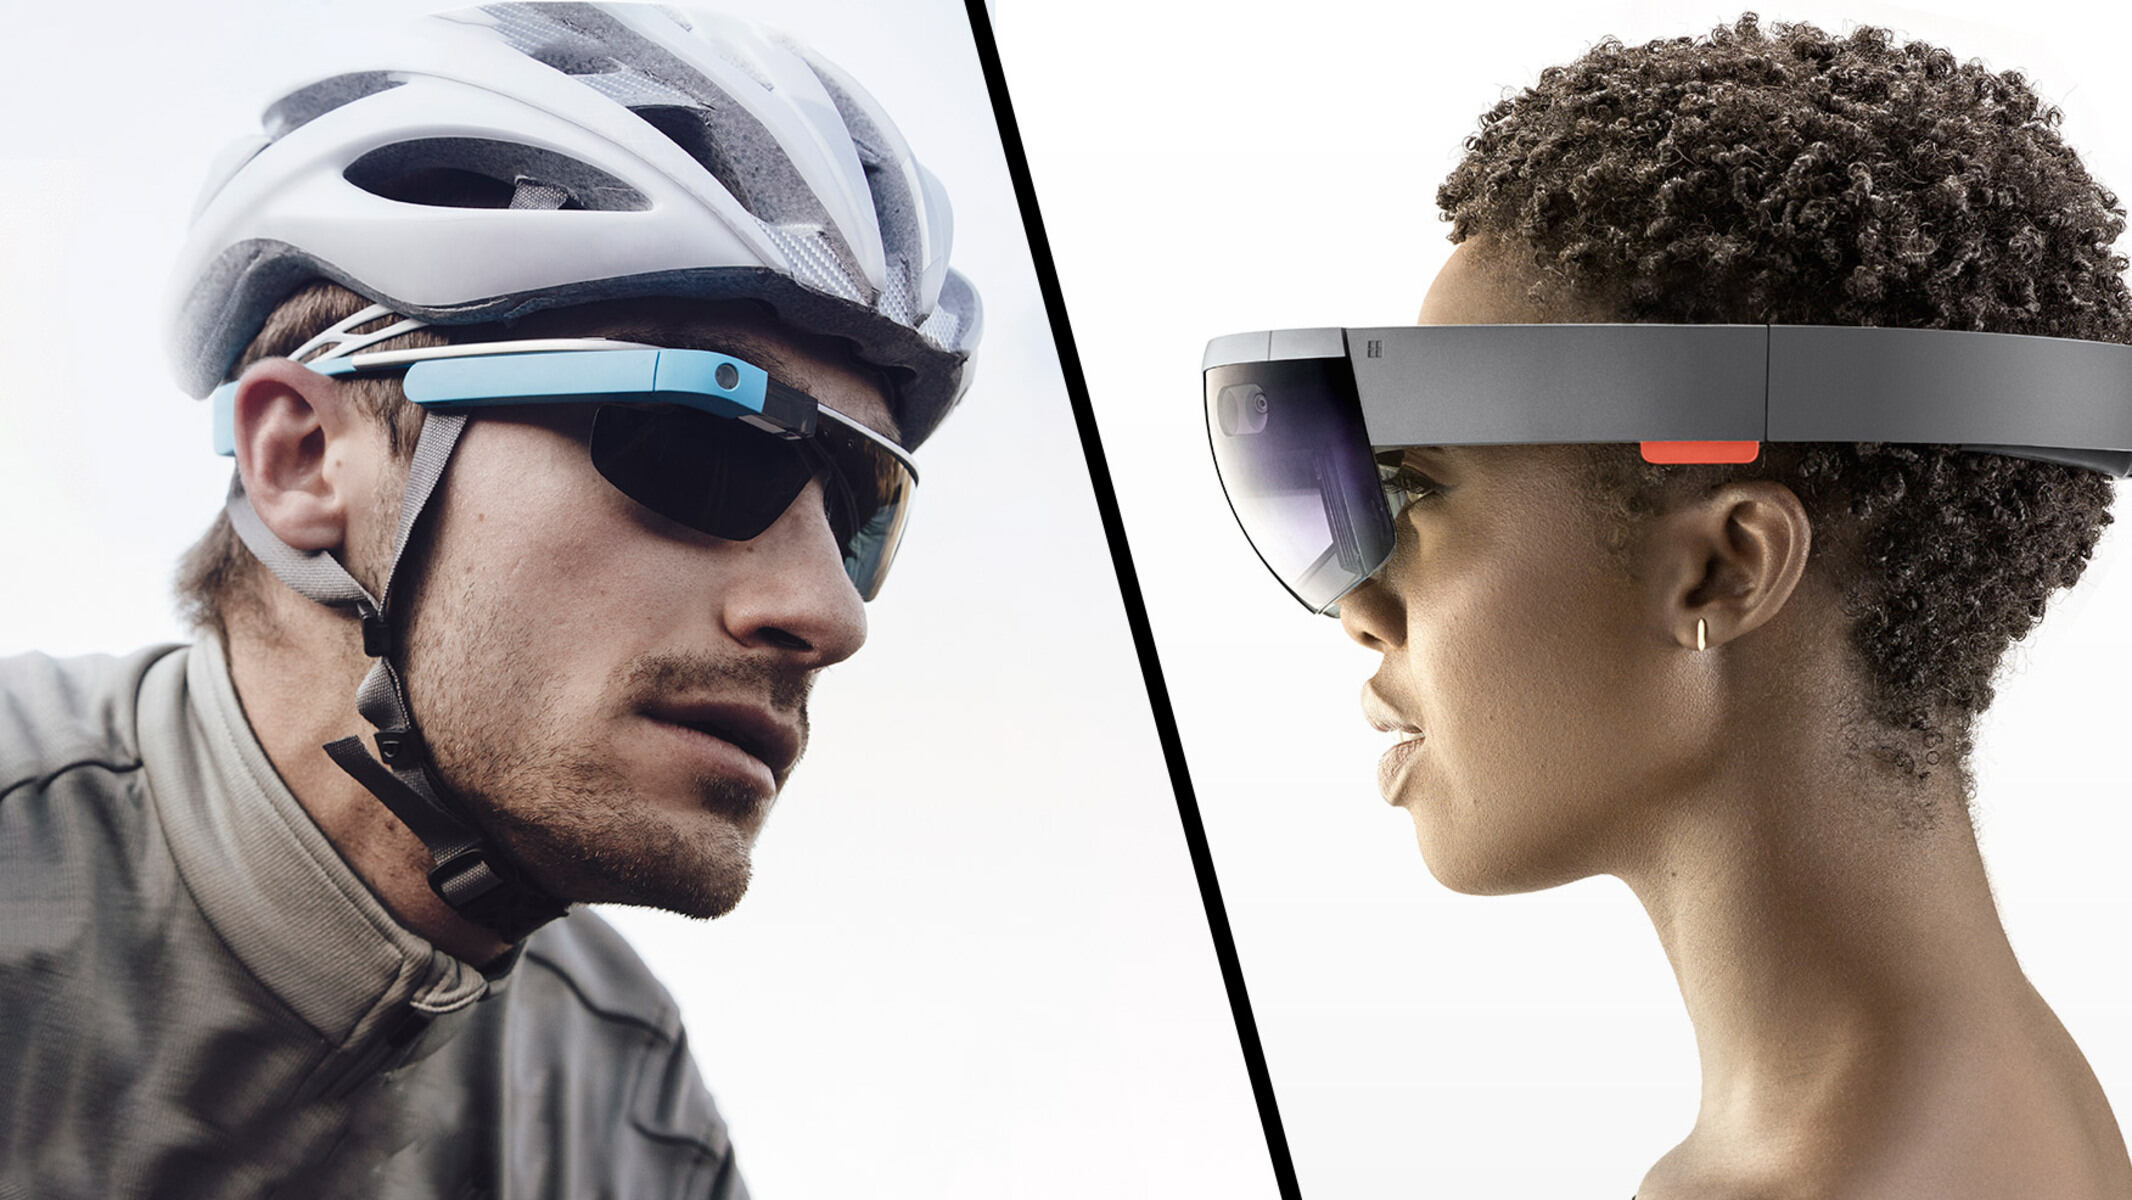 vr-ar-headsets-vs-smart-glasses-whats-the-difference